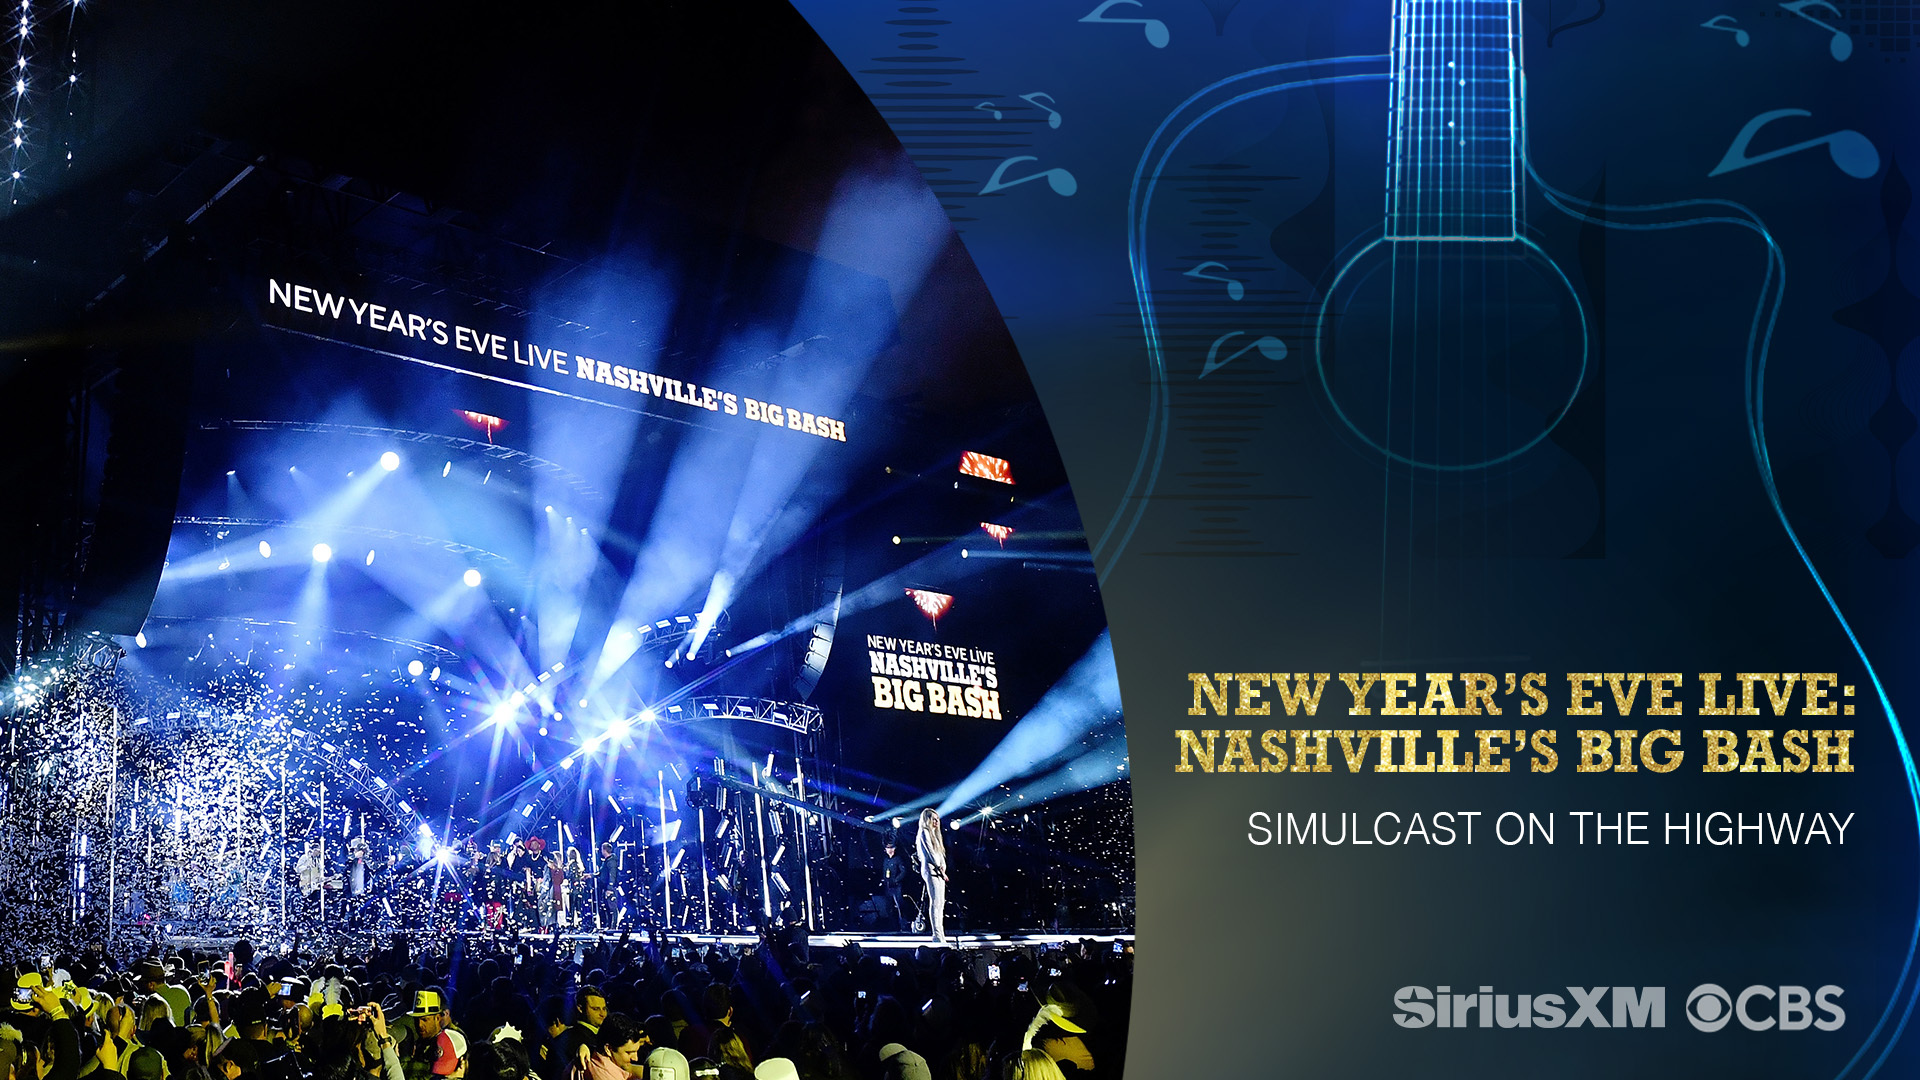 CBS Presents New Year's Eve Live: Nashville's Big Bash - Simulcast on SiriusXM's The Highway